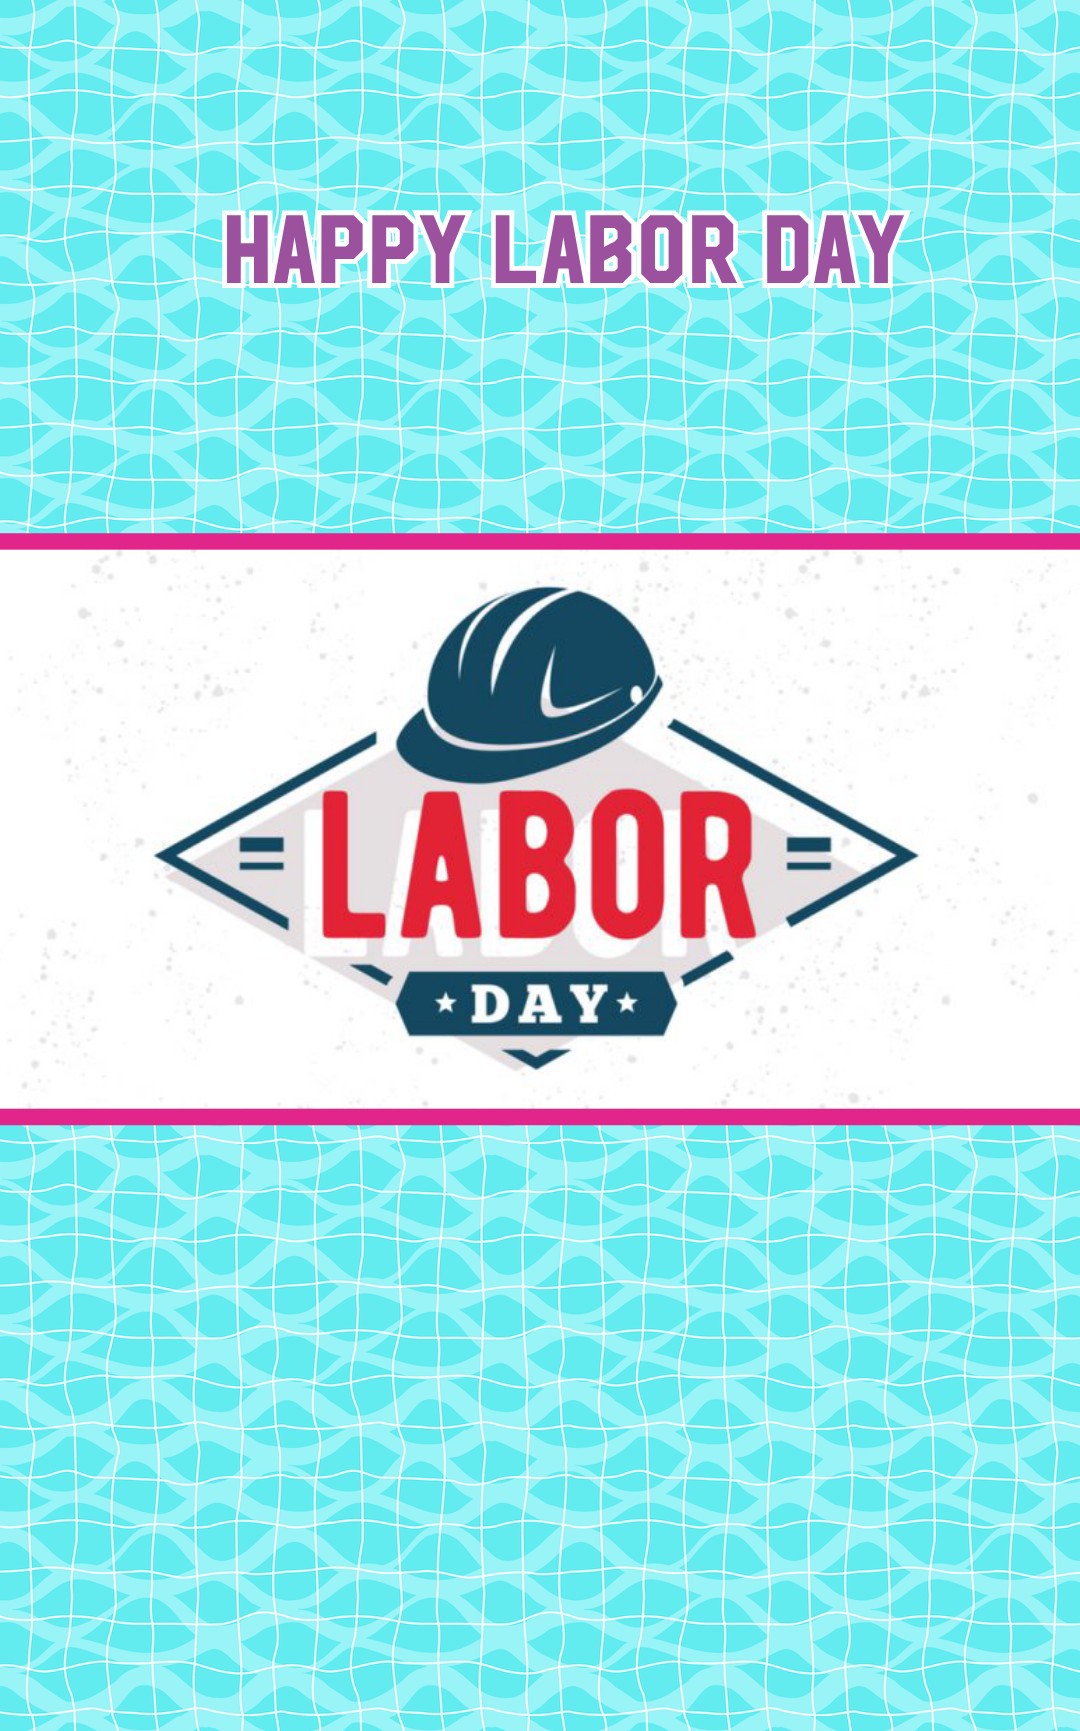     ♡  Tap ♡
Happy Labor Day
Everyone and just remember to follow me 